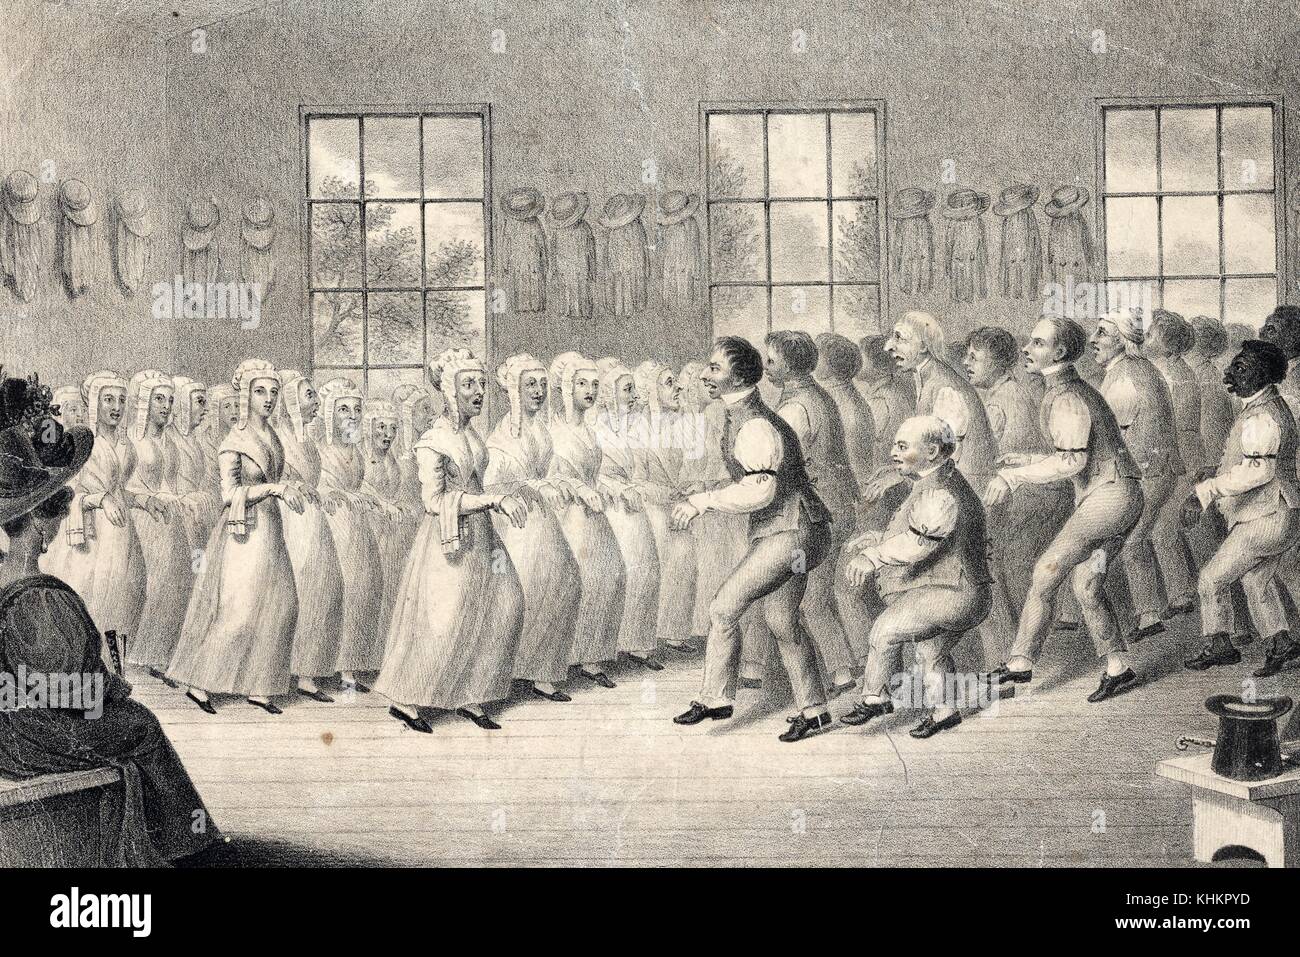 A lithograph that depicts a large group of Shakers, who are performing a ritual dance that was described as trembling, a part of their worship service, the left side of the room consists of women wearing long dresses and bonnets, the right side of the room is entirely men wearing shirts, vests and pants, each group faces the other while performing this dance, 1834. From the New York Public Library. Stock Photo